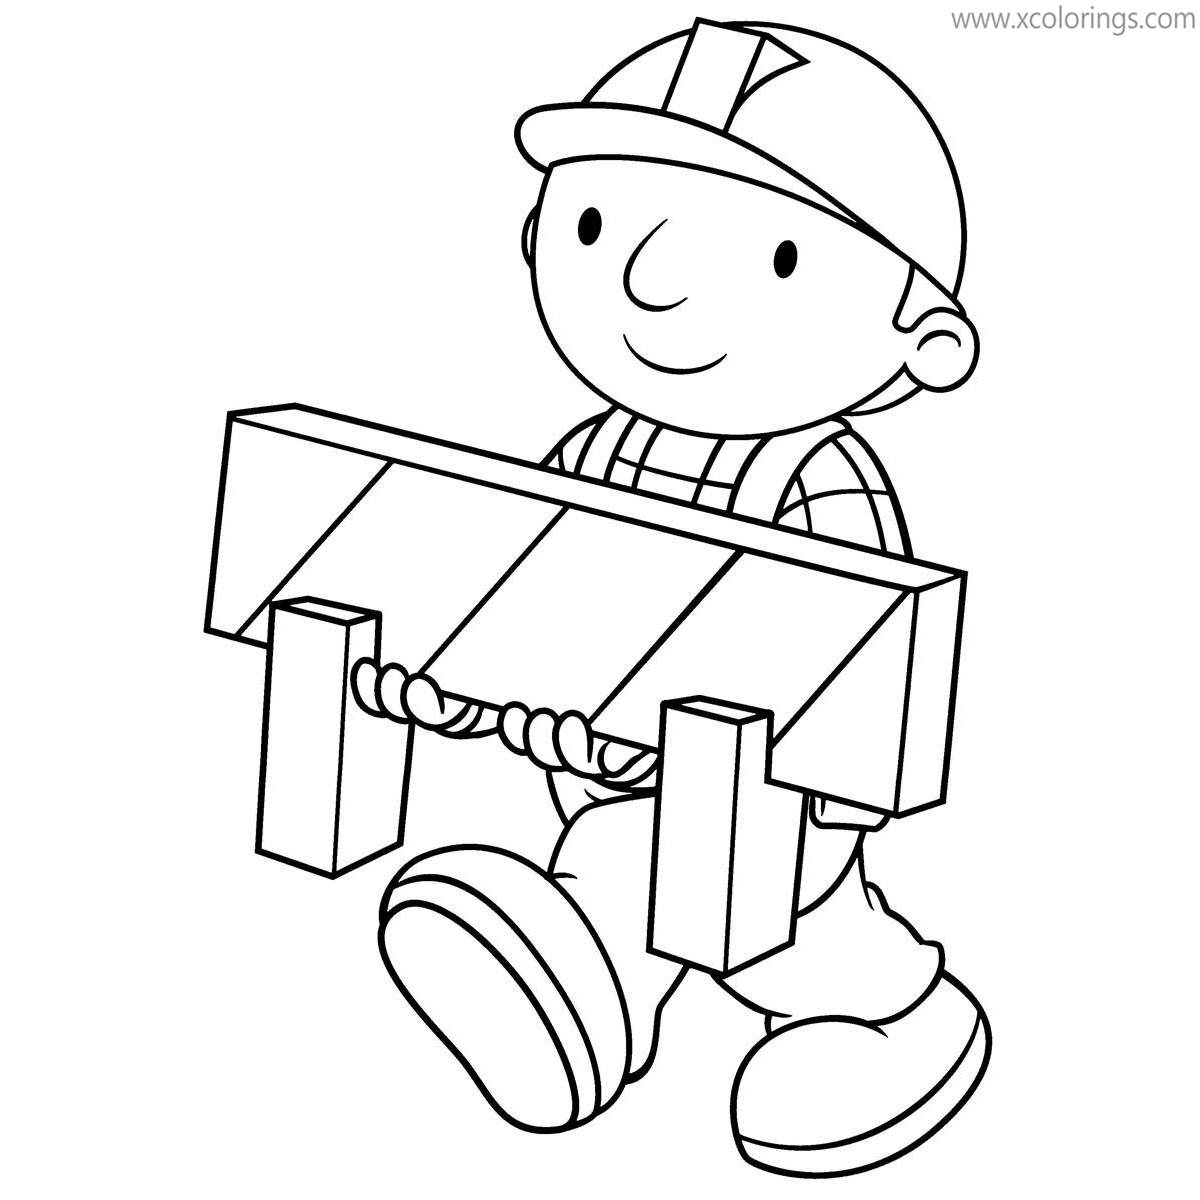 Free Bob The Builder Coloring Pages Bob Carrying a Roadblock printable